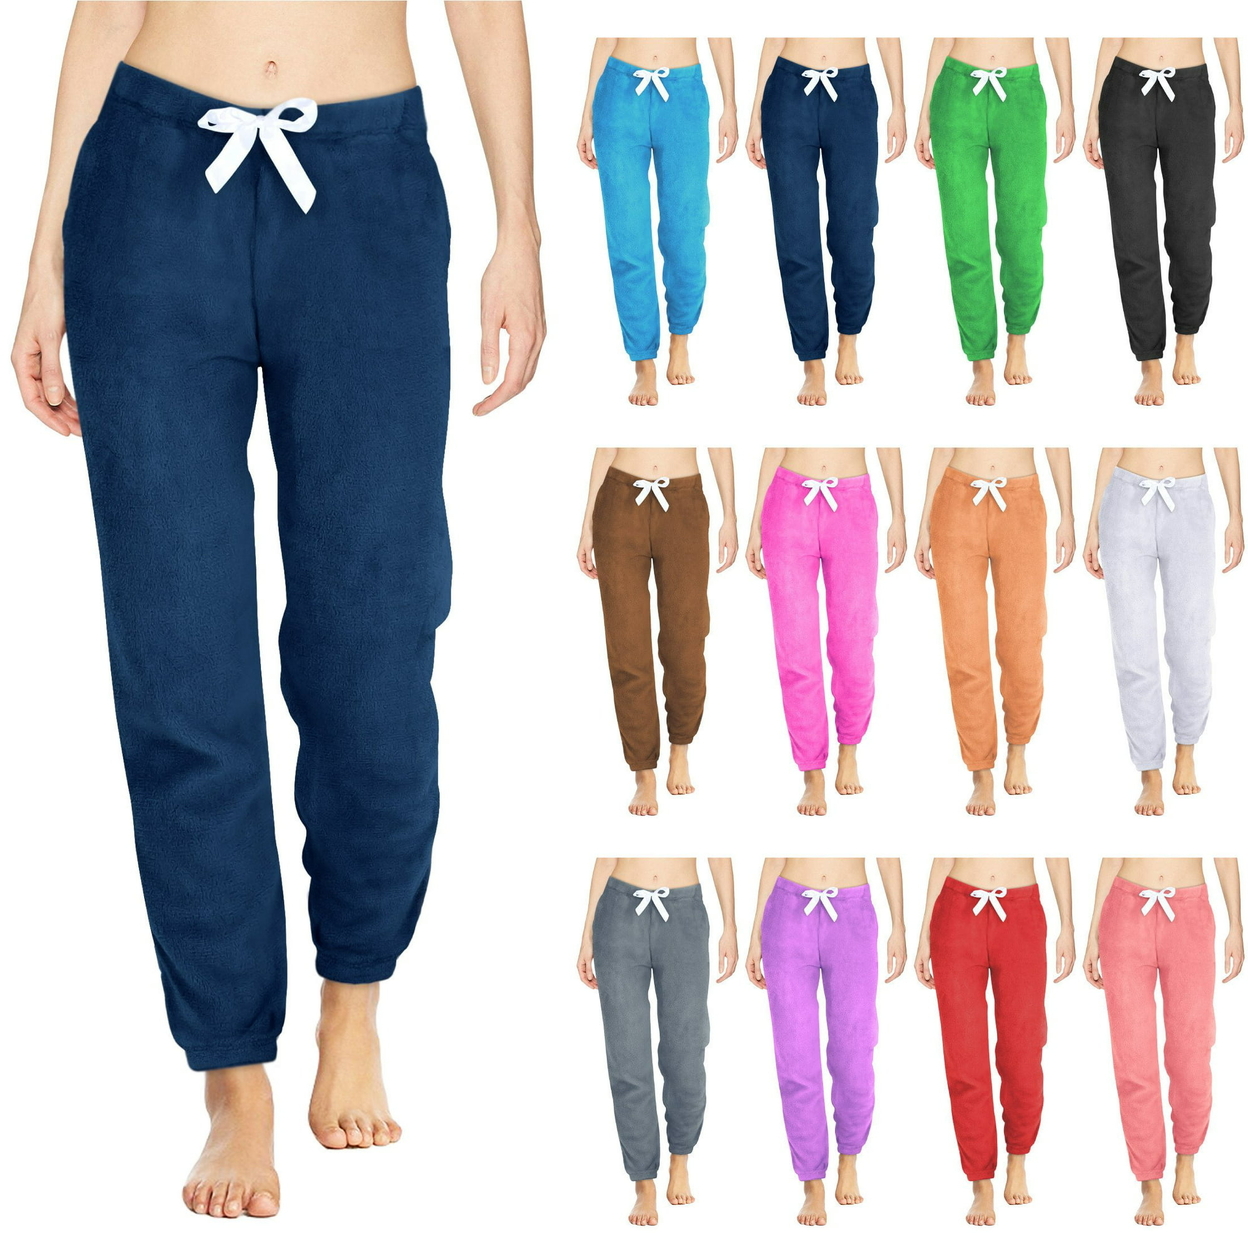 Multi-Pack: Women's Solid & Printed Ultra-Soft Comfy Stretch Micro-Fleece Pajama Lounge Pants - 3-pack, Medium, Shapes